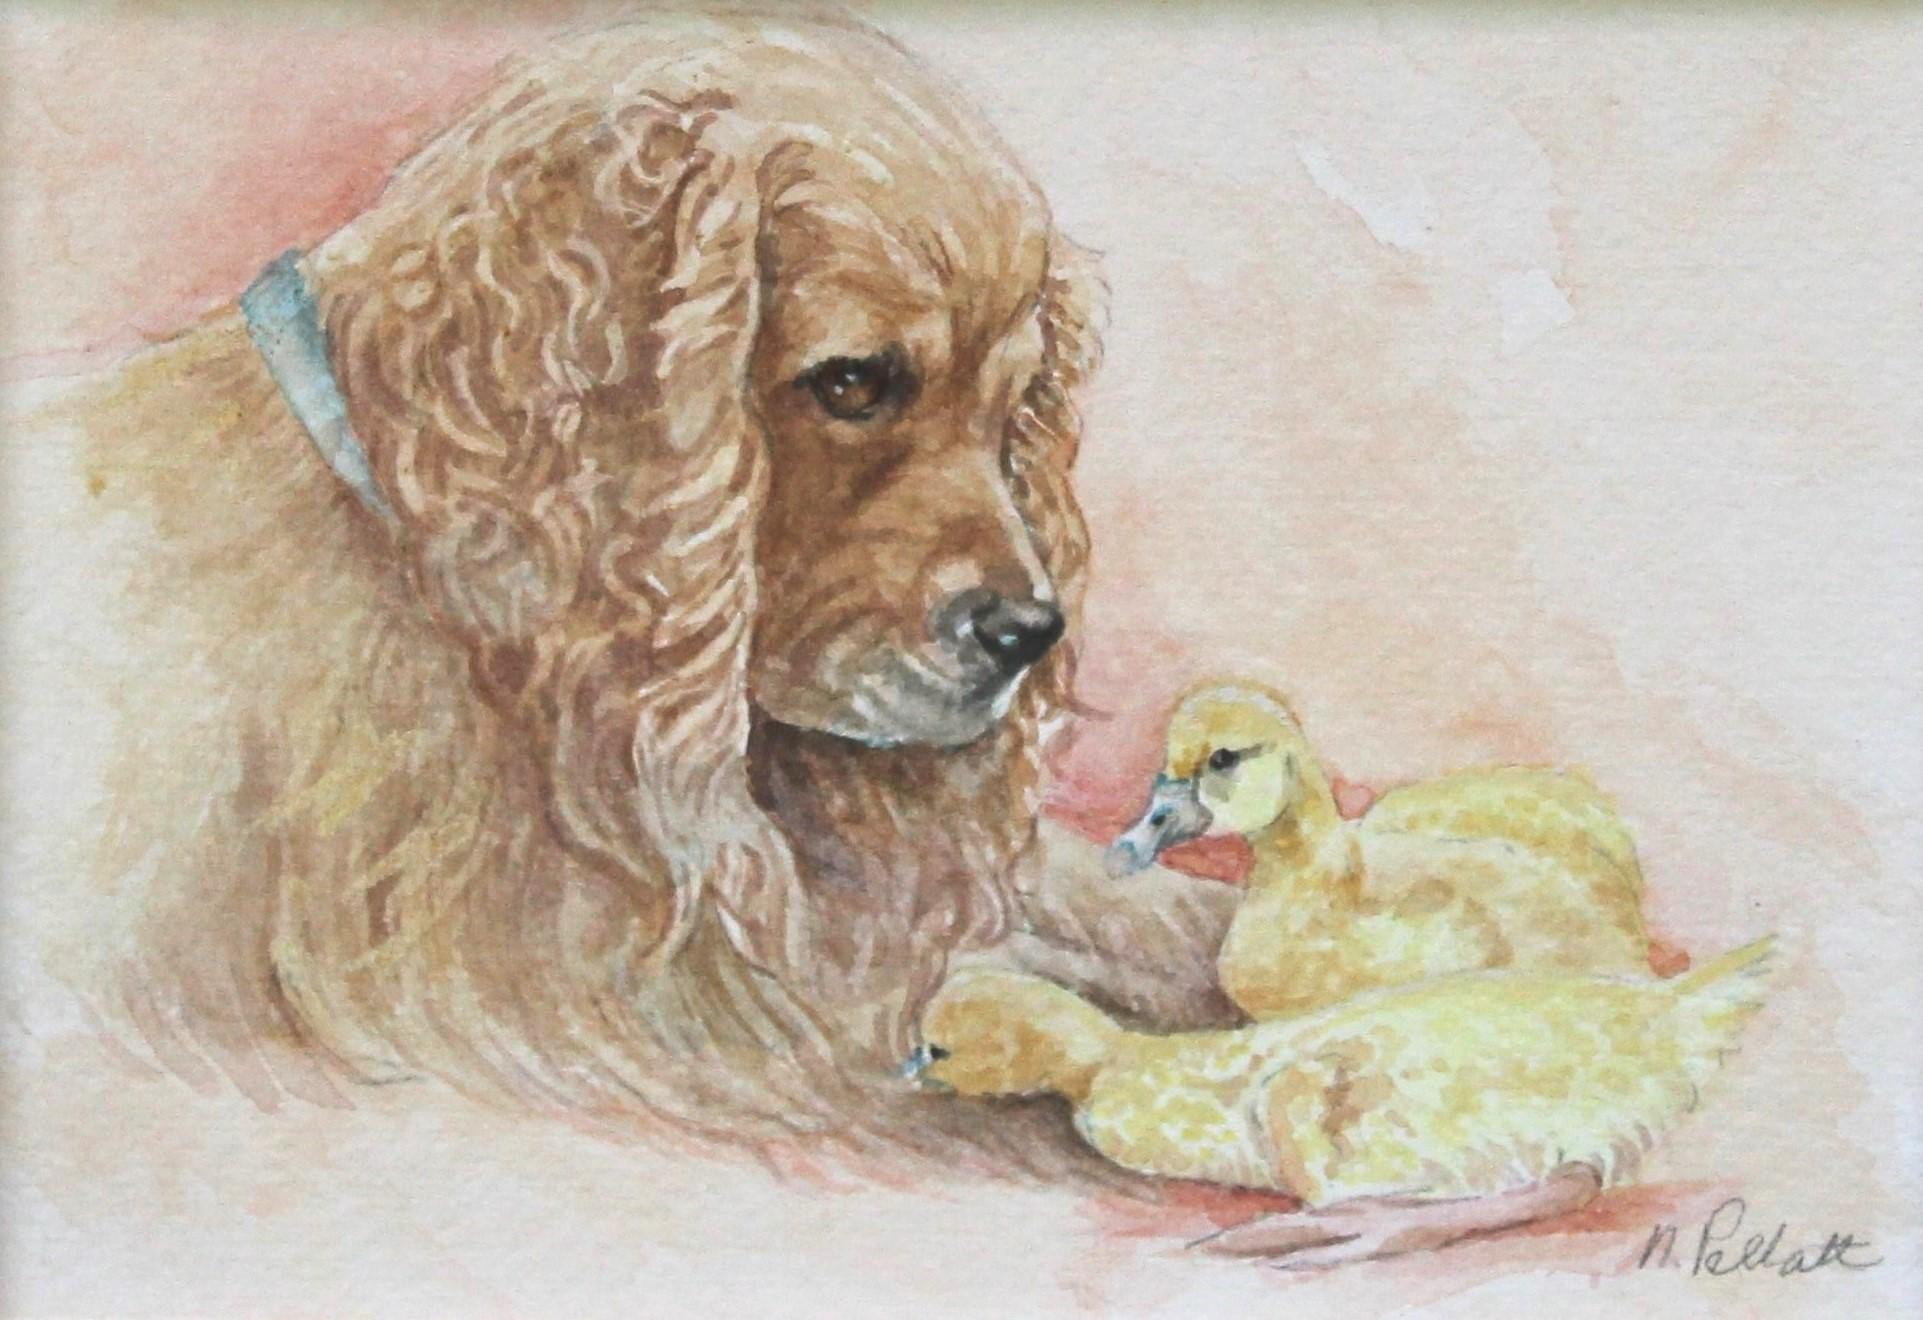 Charming detailed dog painting of a curious Spaniel looking at baby chics, frame - Painting by Nancy Pellatt